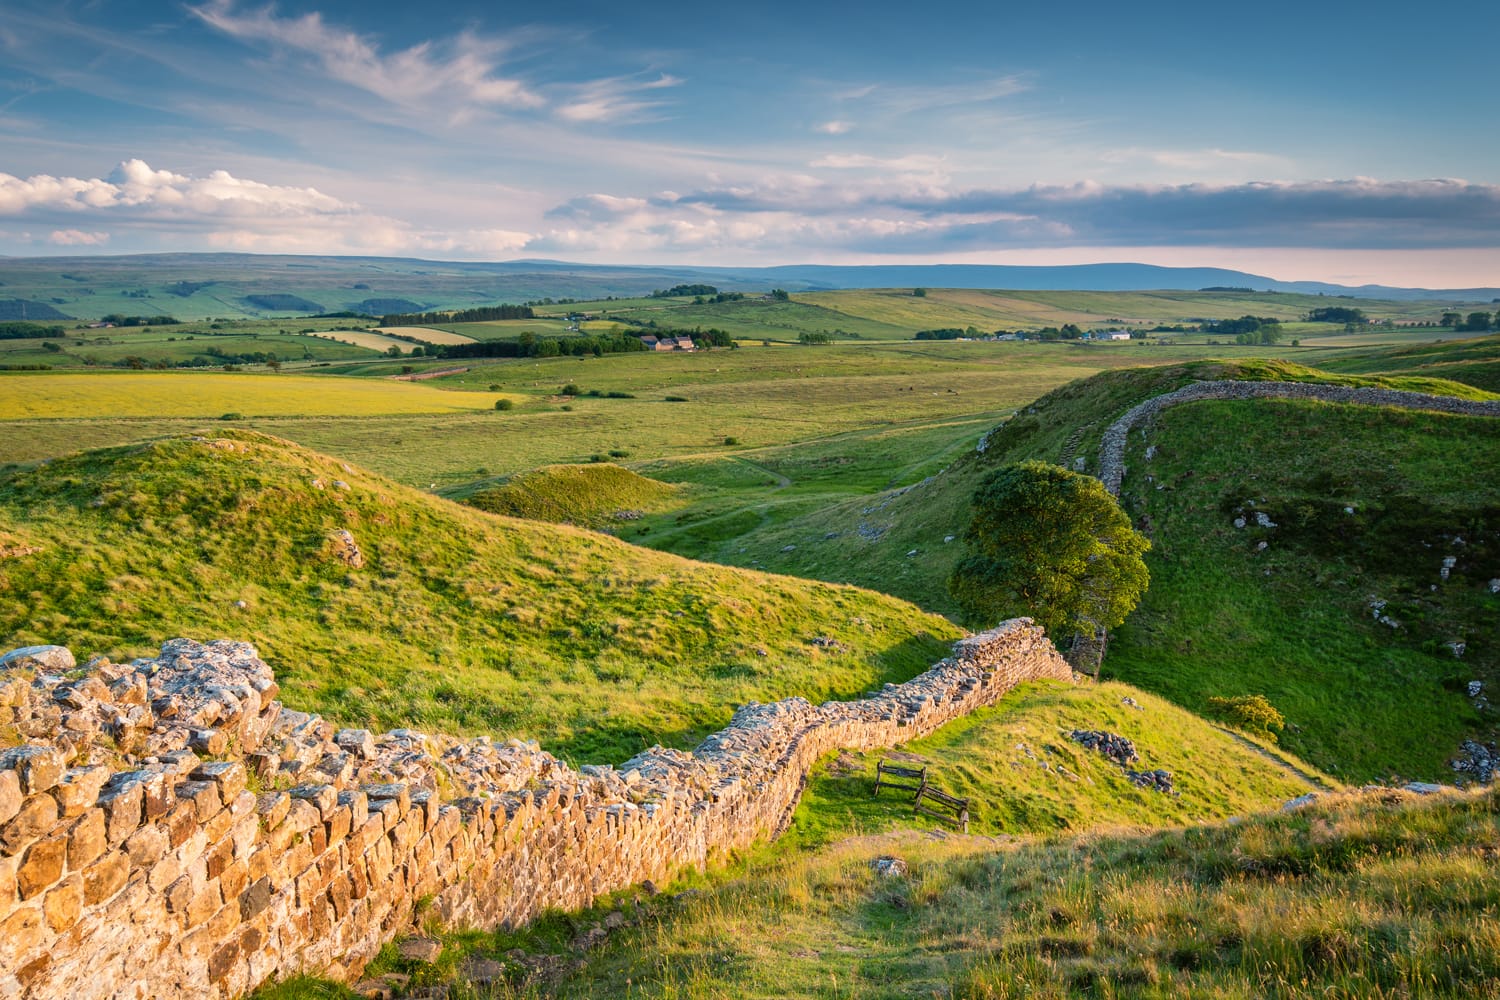 Hadrian's Wall above Steel Rigg / Hadrian's Wall is a World Heritage Site in the beautiful Northumberland National Park. Popular with walkers along the Hadrian's Wall Path and Pennine Way